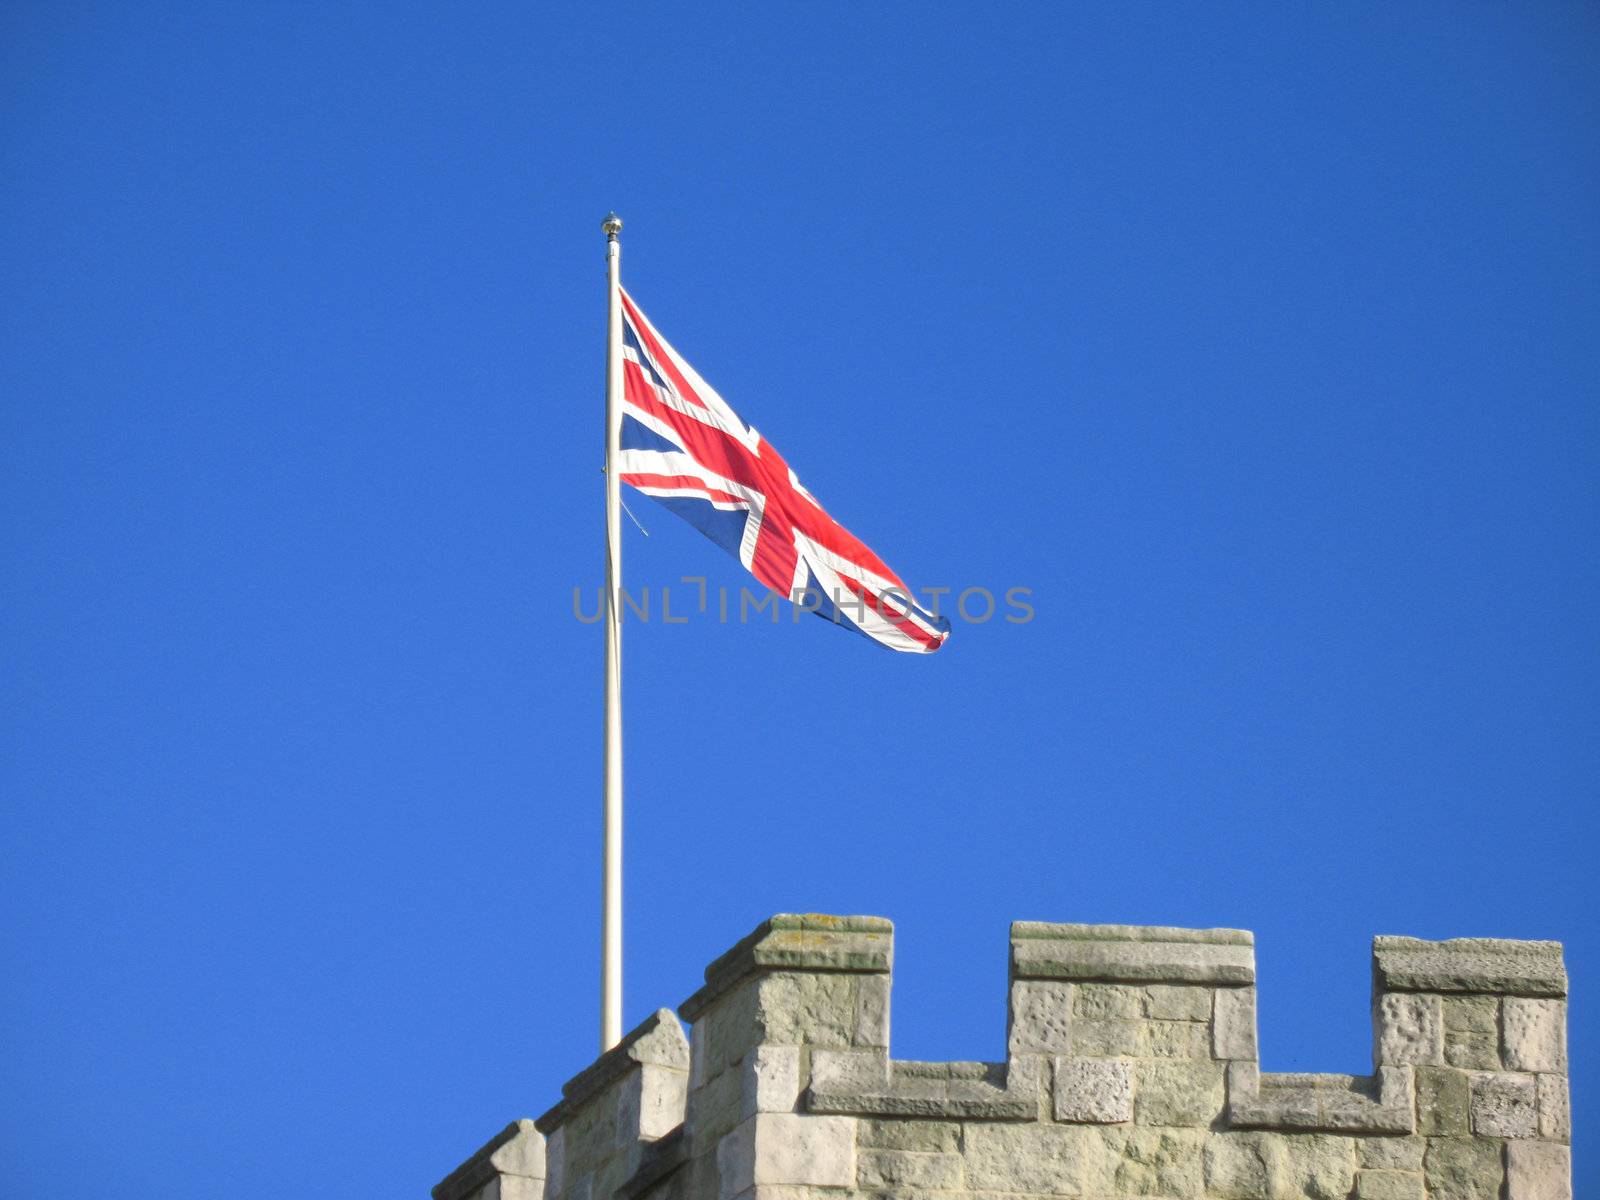 Union flag by tommroch